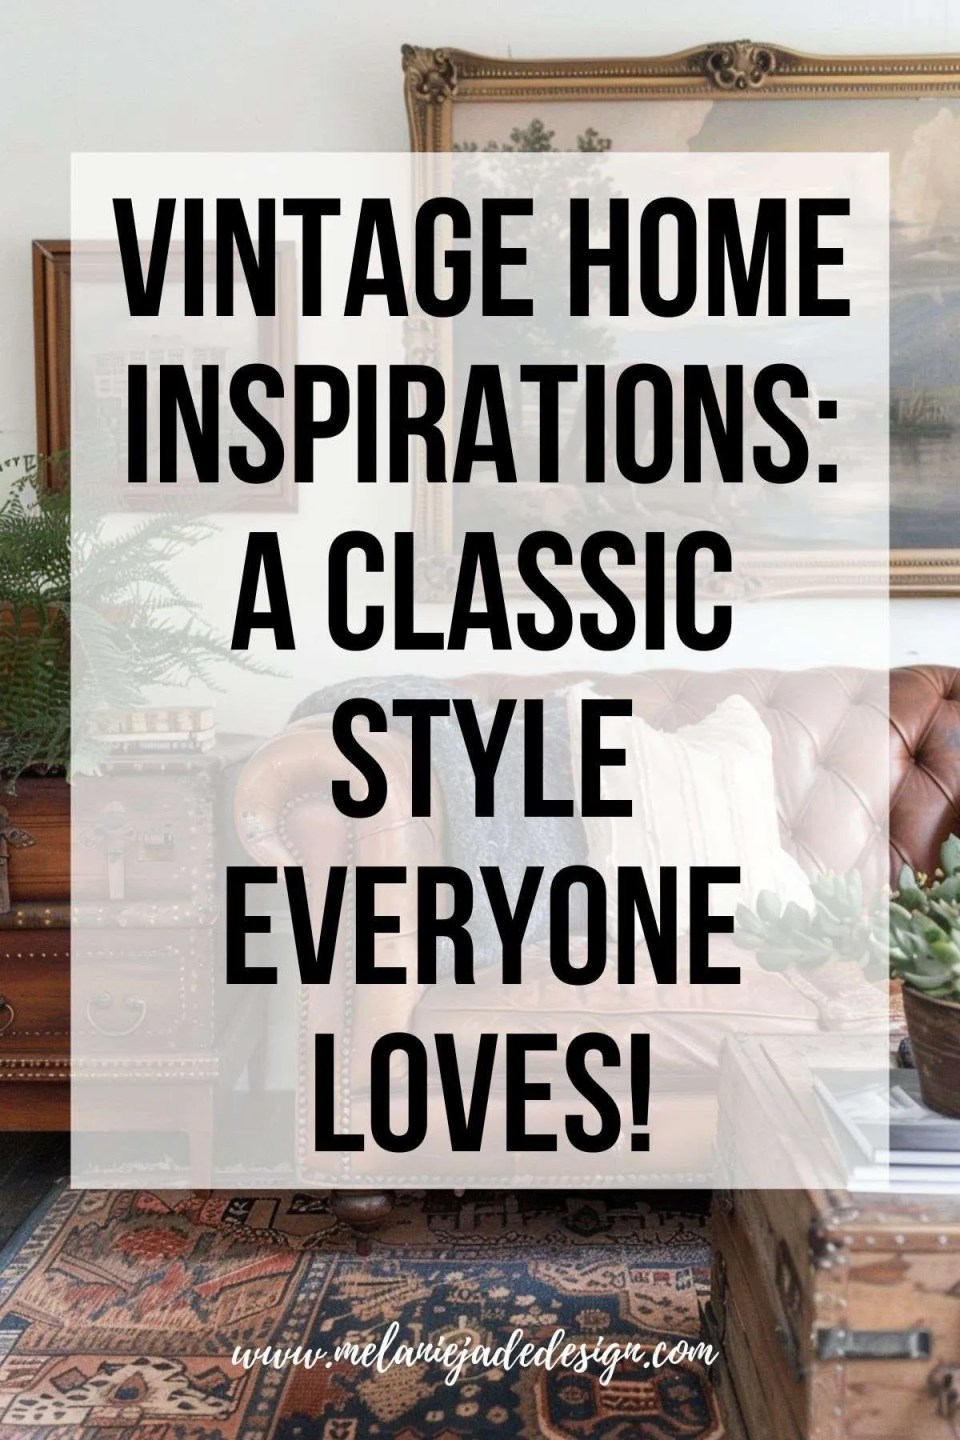 Vintage Home Inspirations: A Classic Style Everyone Loves! pinterest pin